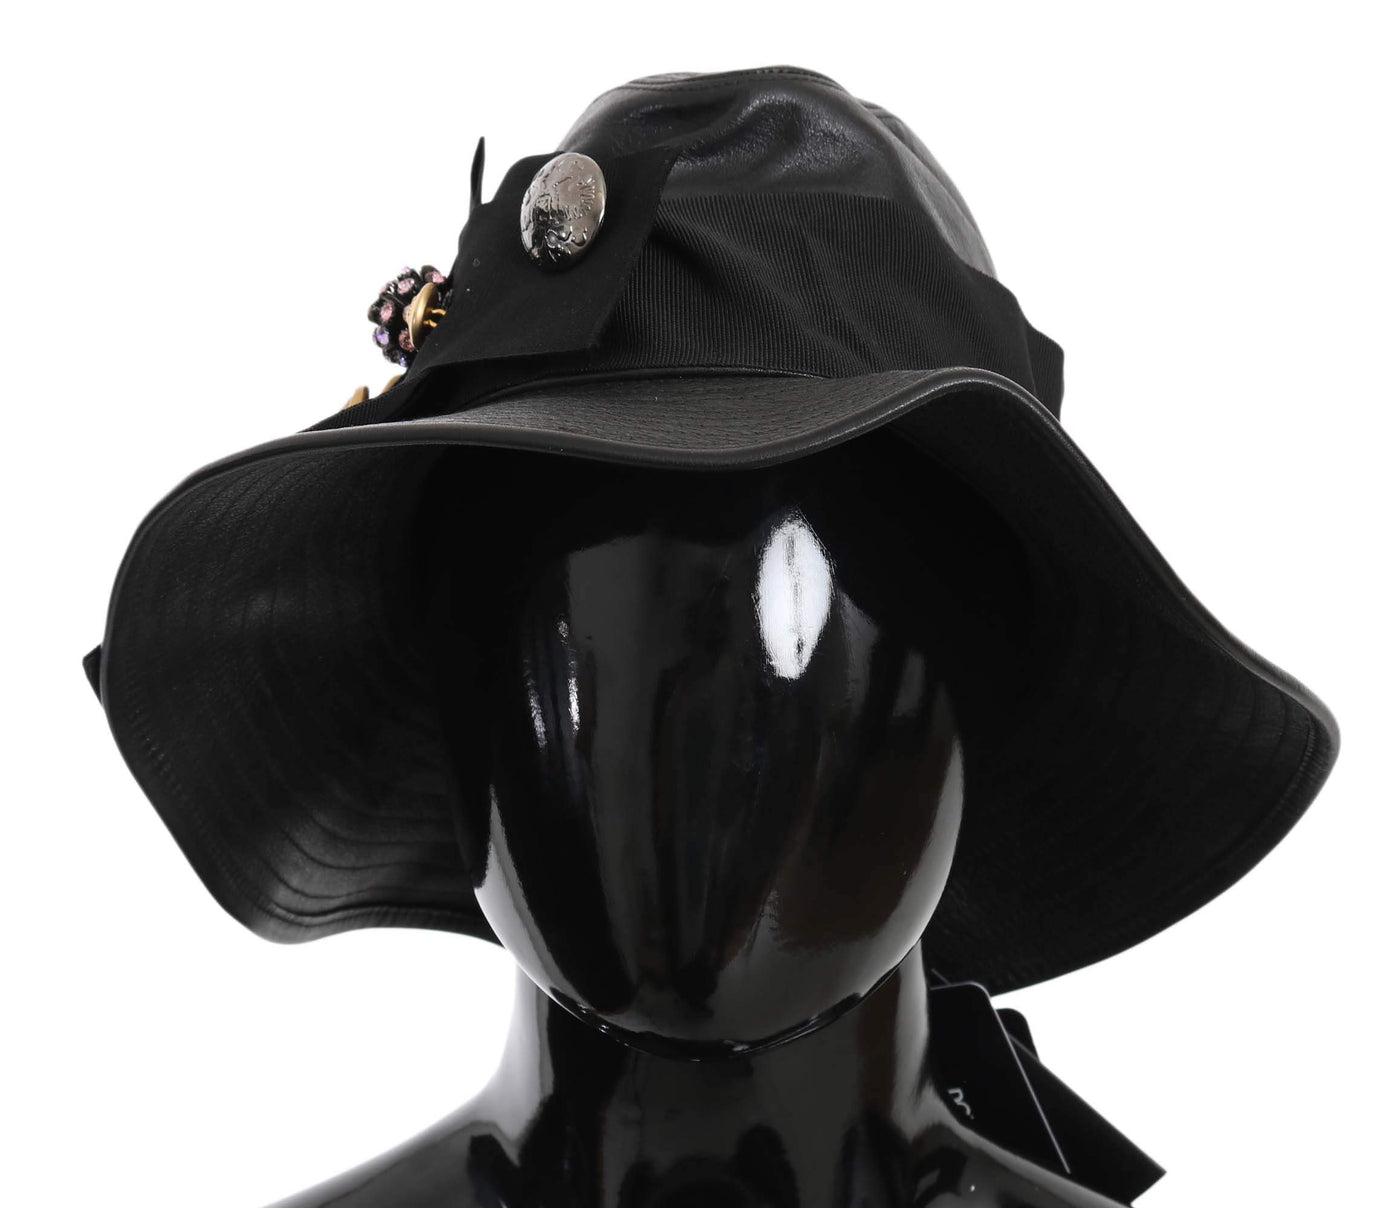 Dolce & Gabbana  Black Leather DG Coin Crystal Wide Brim Hat #women, 56 cm|XS, 58 cm|M, Accessories - New Arrivals, Black, Brand_Dolce & Gabbana, Catch, Dolce & Gabbana, feed-agegroup-adult, feed-color-black, feed-gender-female, feed-size-56 cm|XS, Gender_Women, Hats - Women - Accessories, Kogan at SEYMAYKA